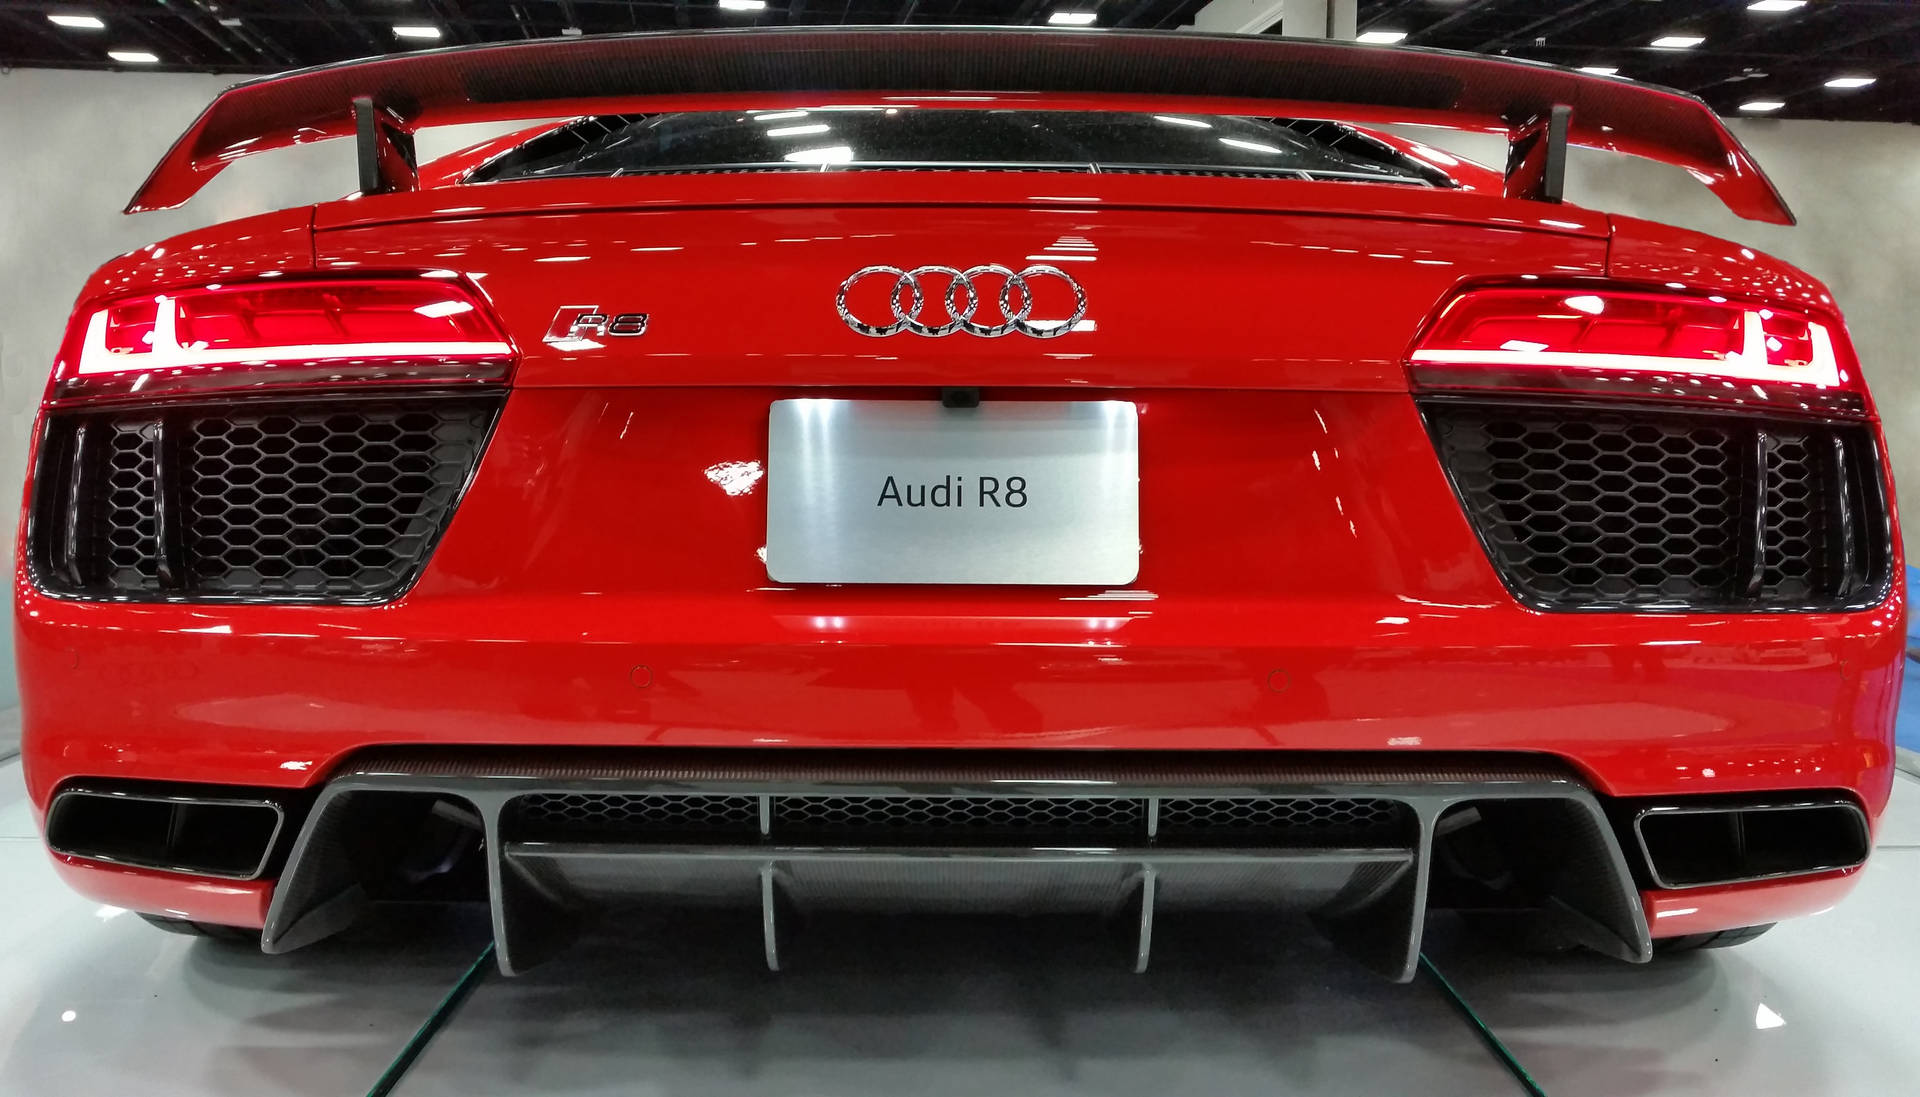 Audi 5232X2988 Wallpaper and Background Image